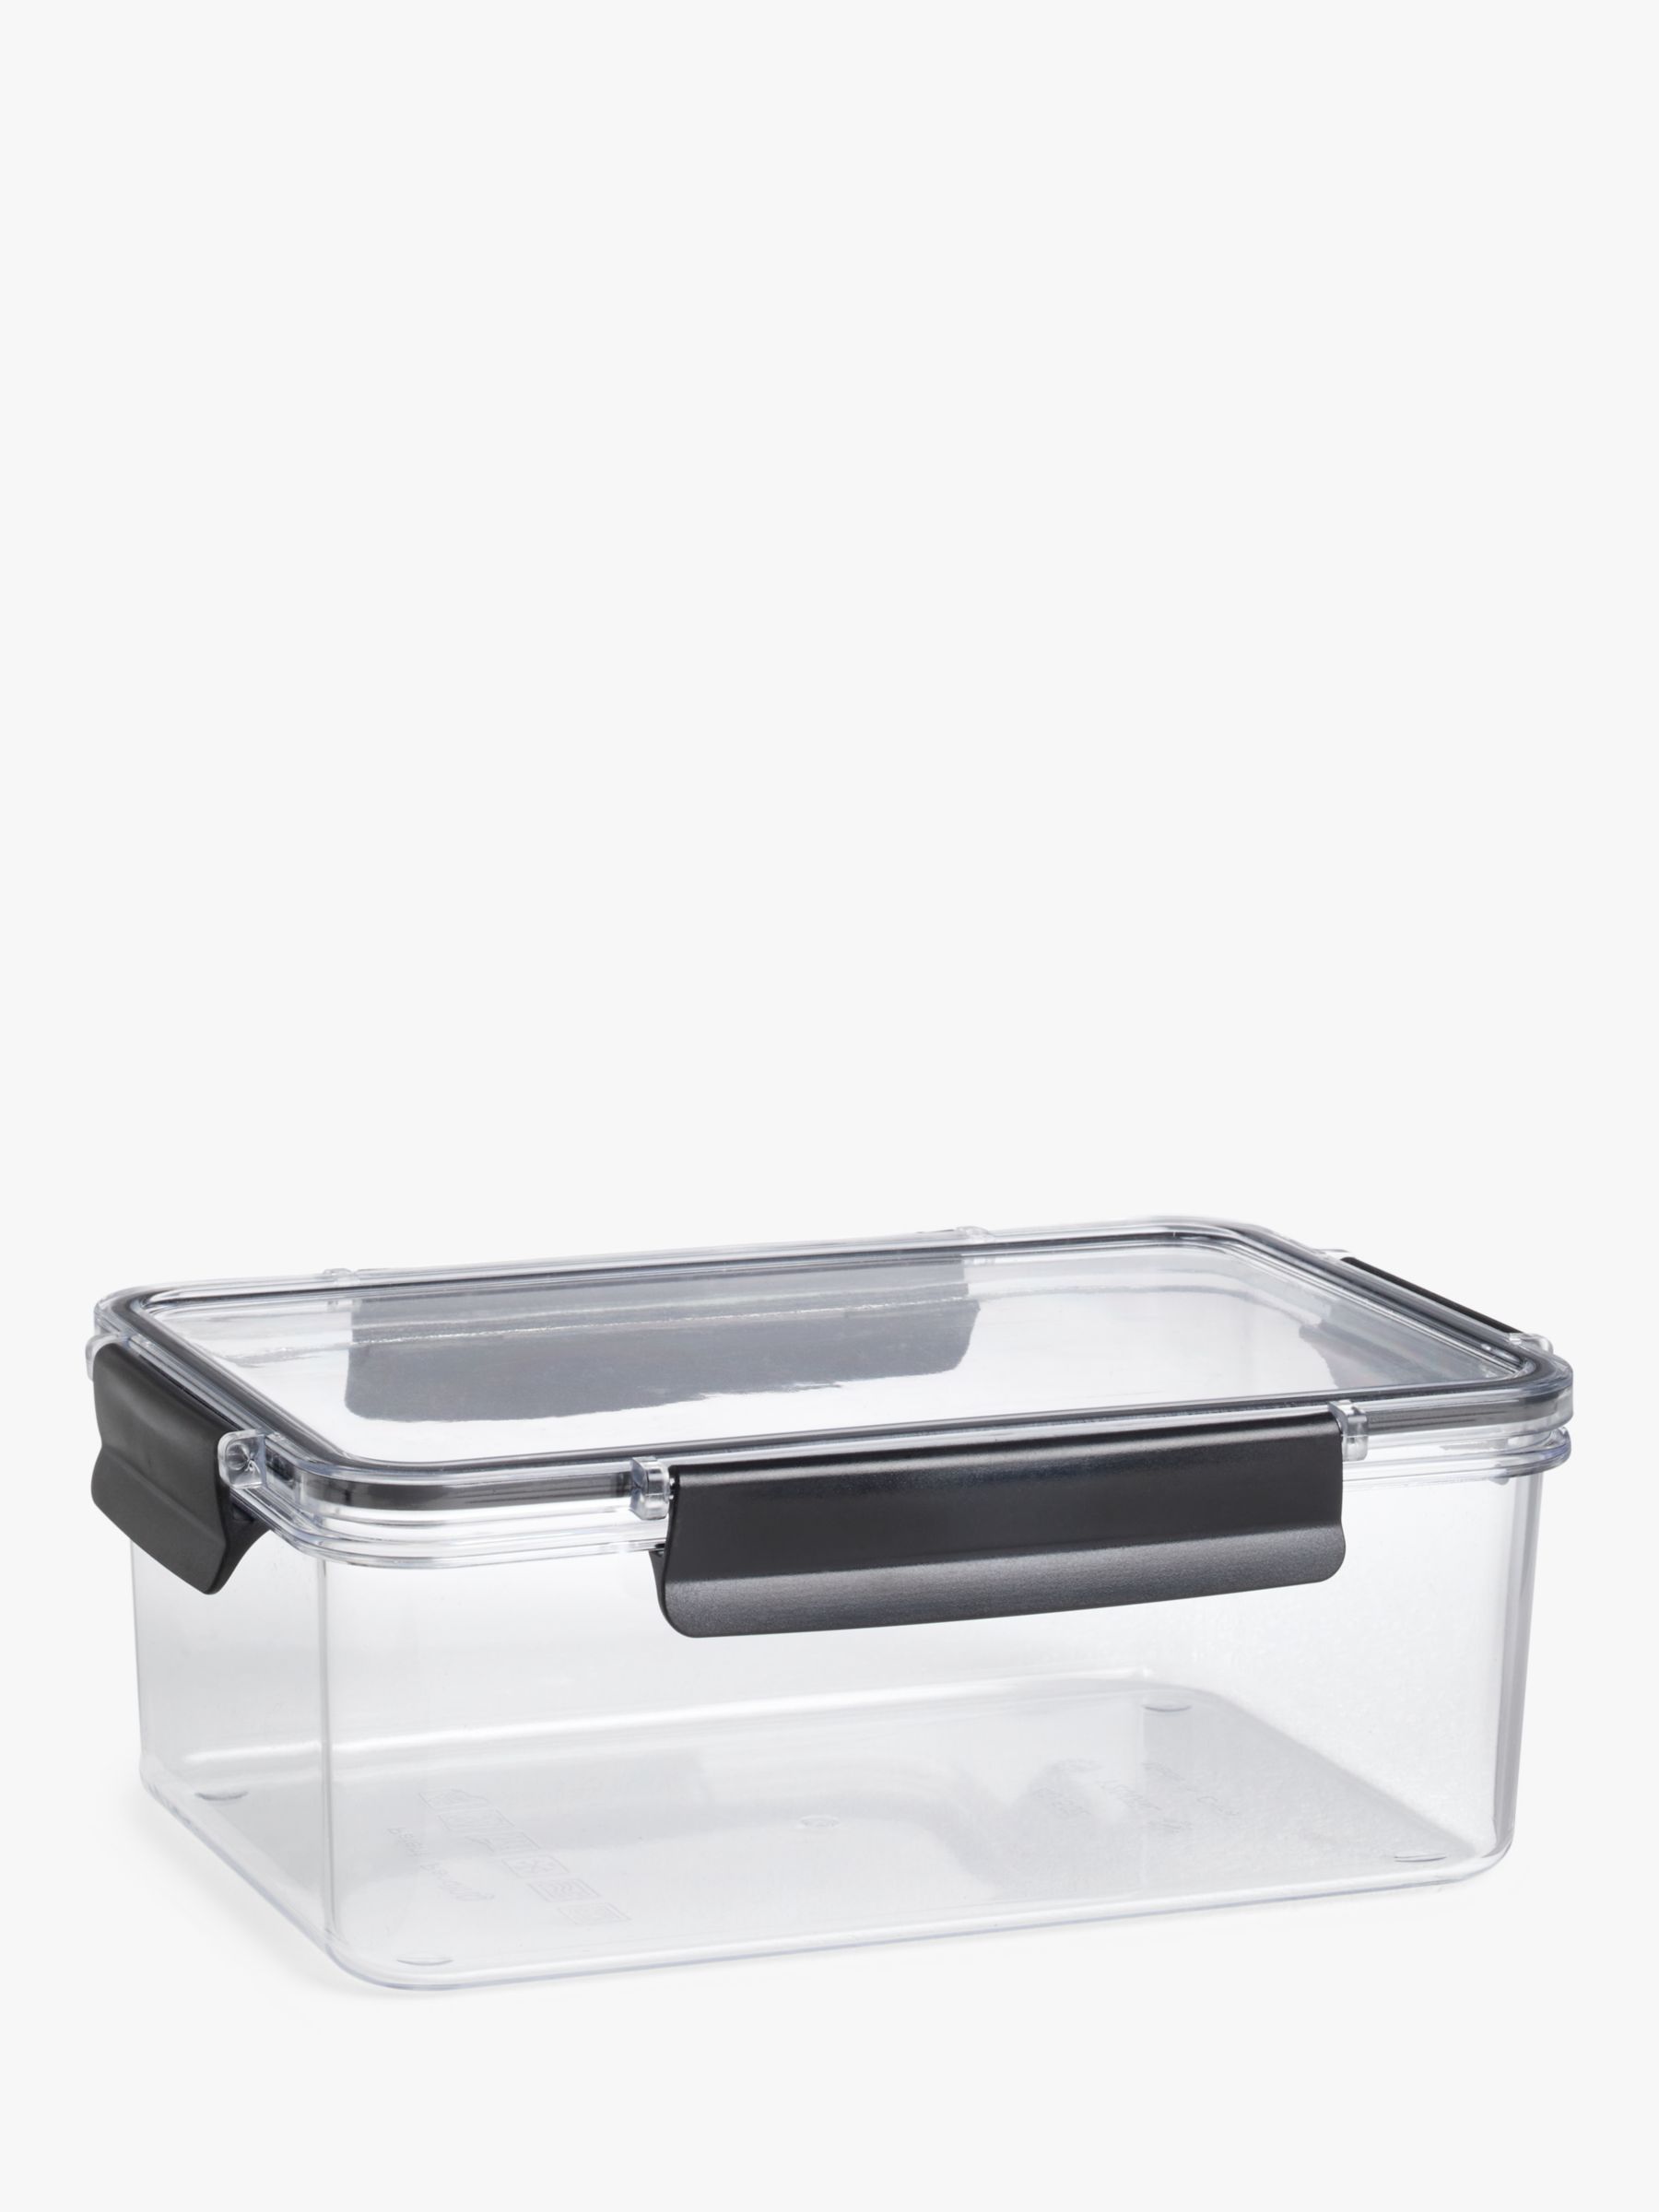 Rubbermaid® Brilliance Container Set - Clear, 10 pc - Ralphs